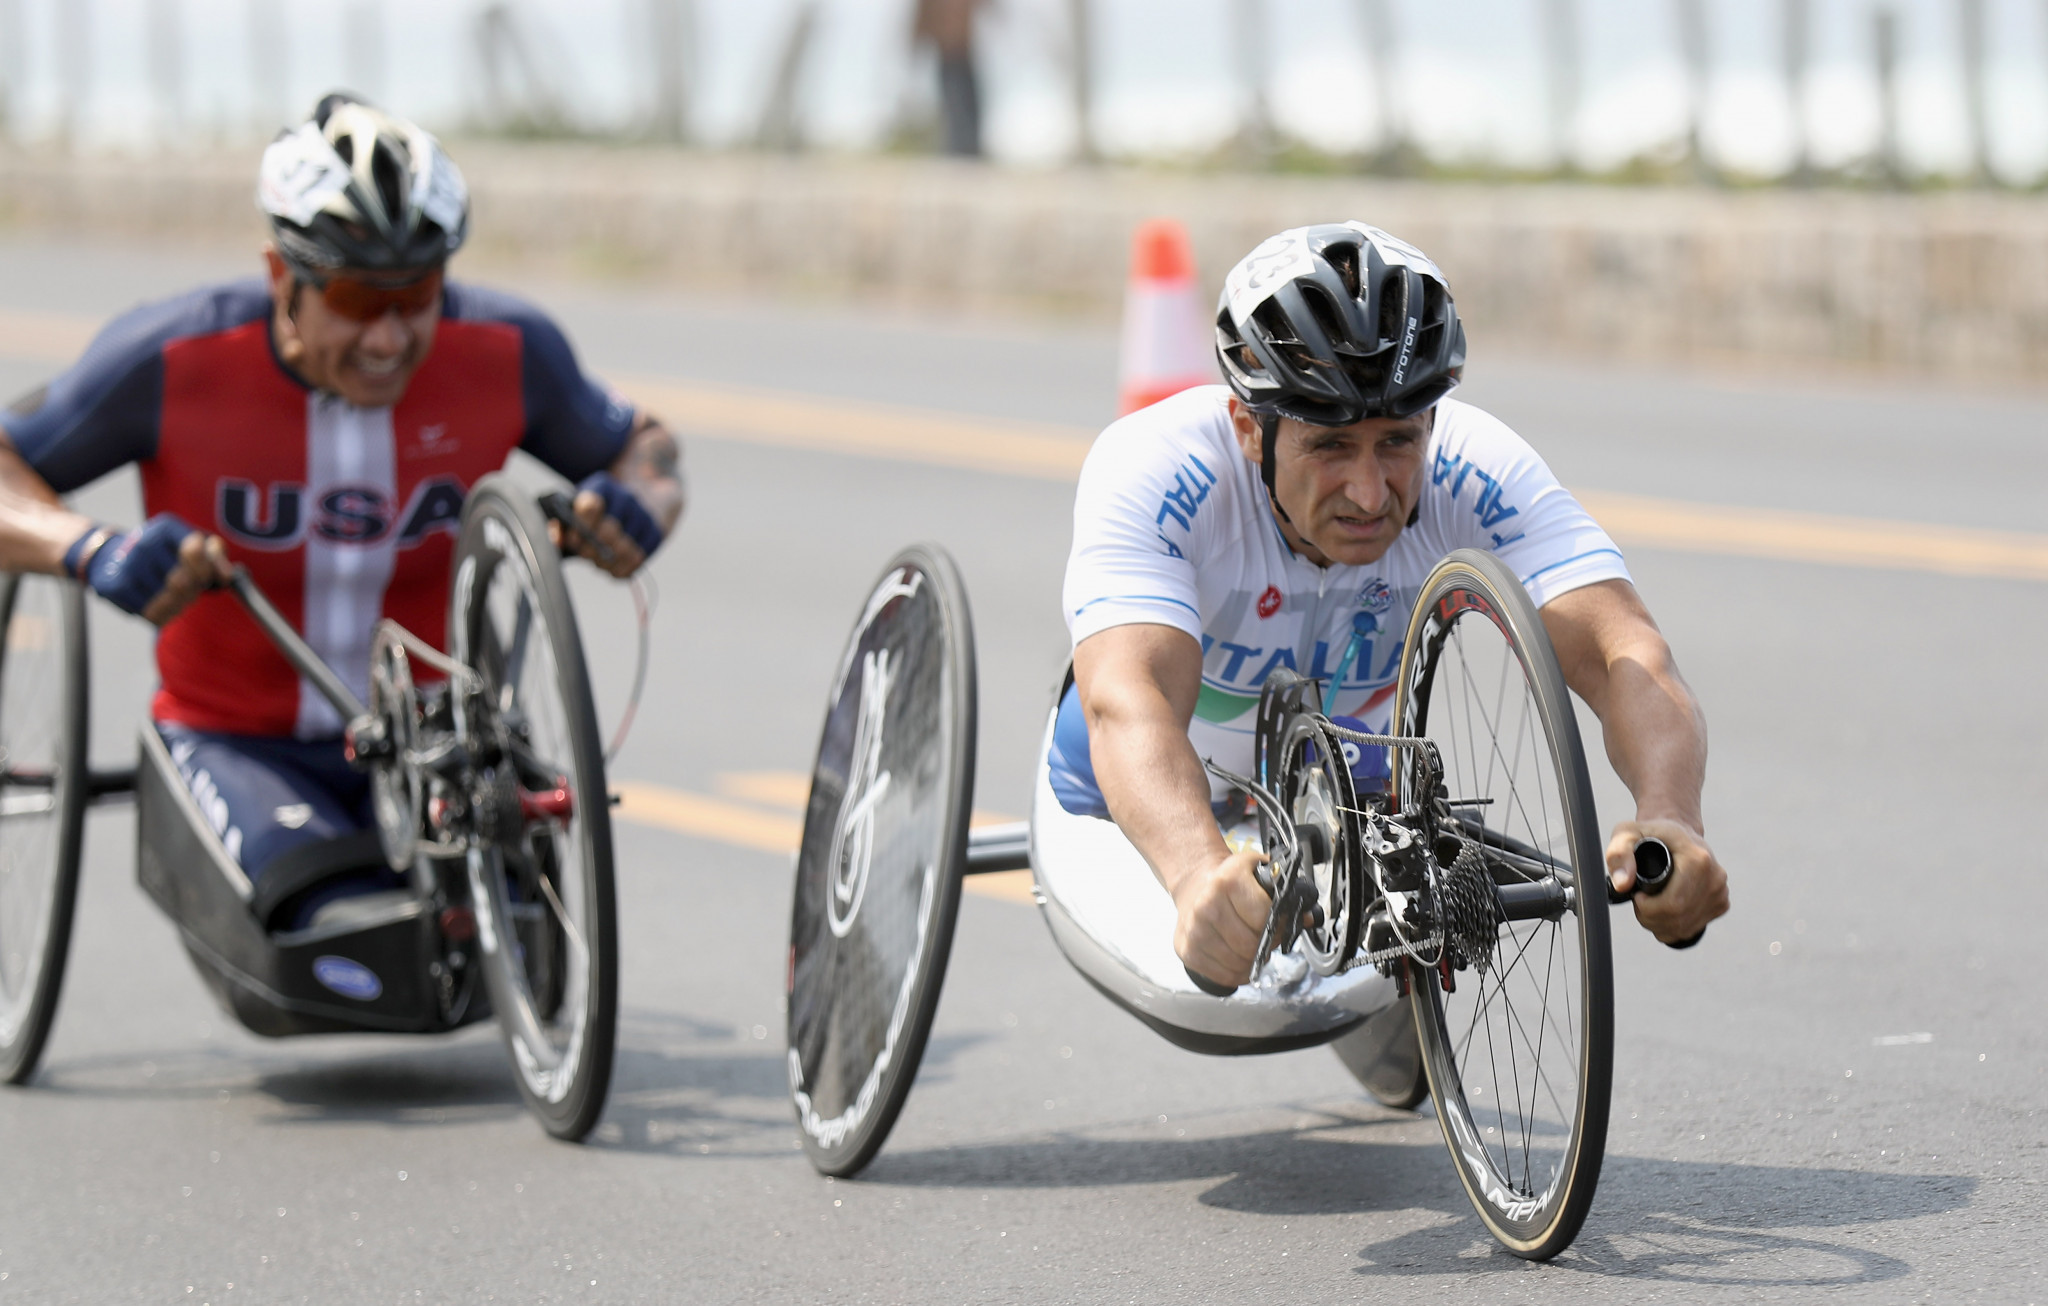 Alex Zanardi has been in hospital since his crash on June 19 ©Getty Images